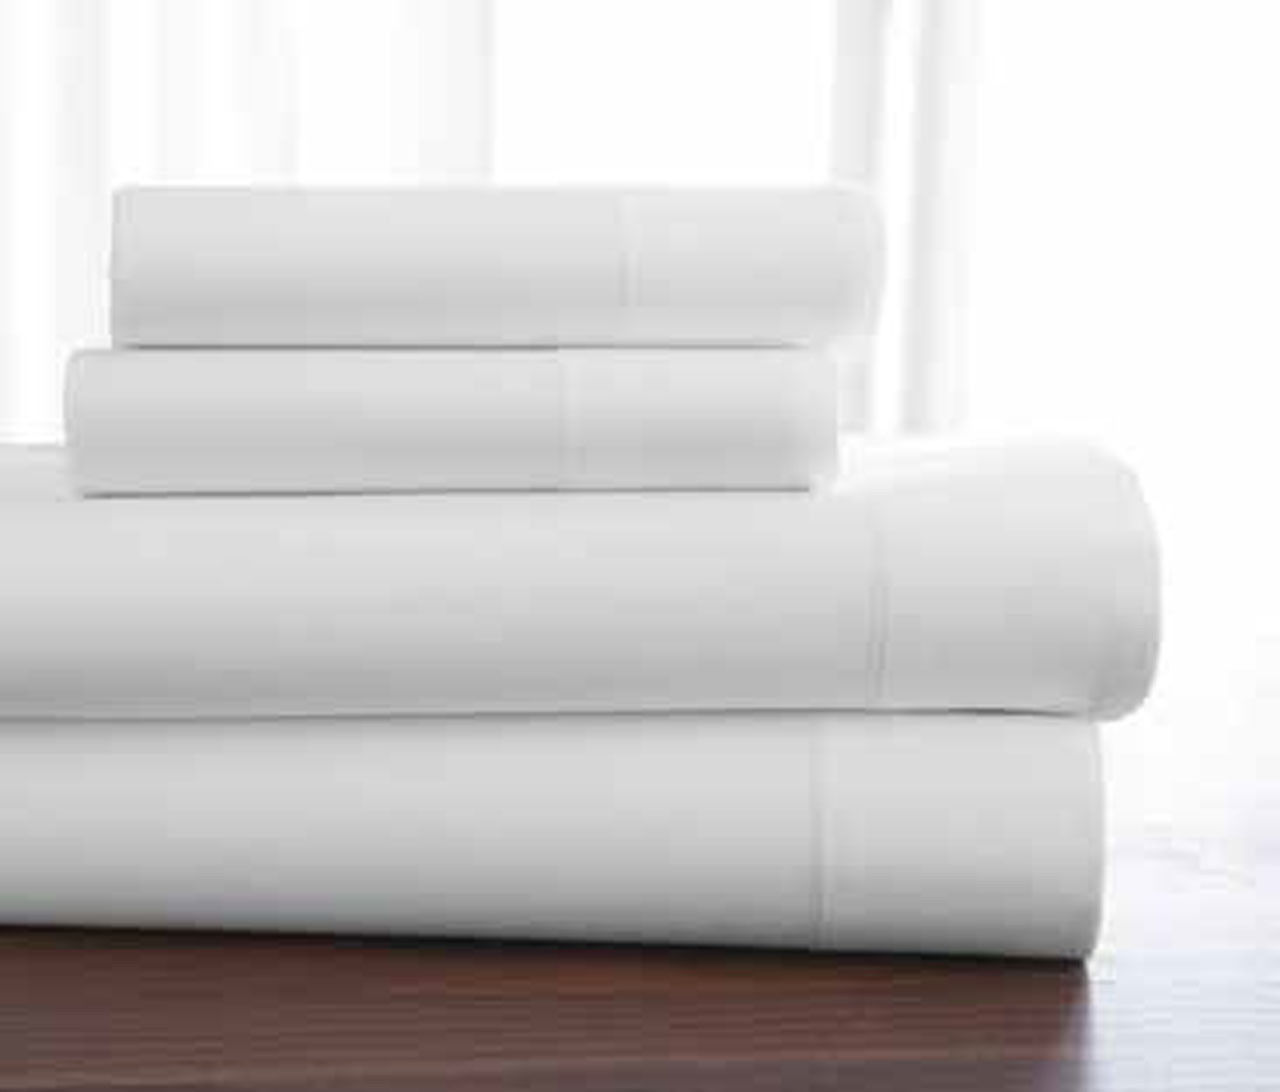 What does the patented HygroCotton® technology offer in Welspun T-400 Premium hygrocotton sheets?